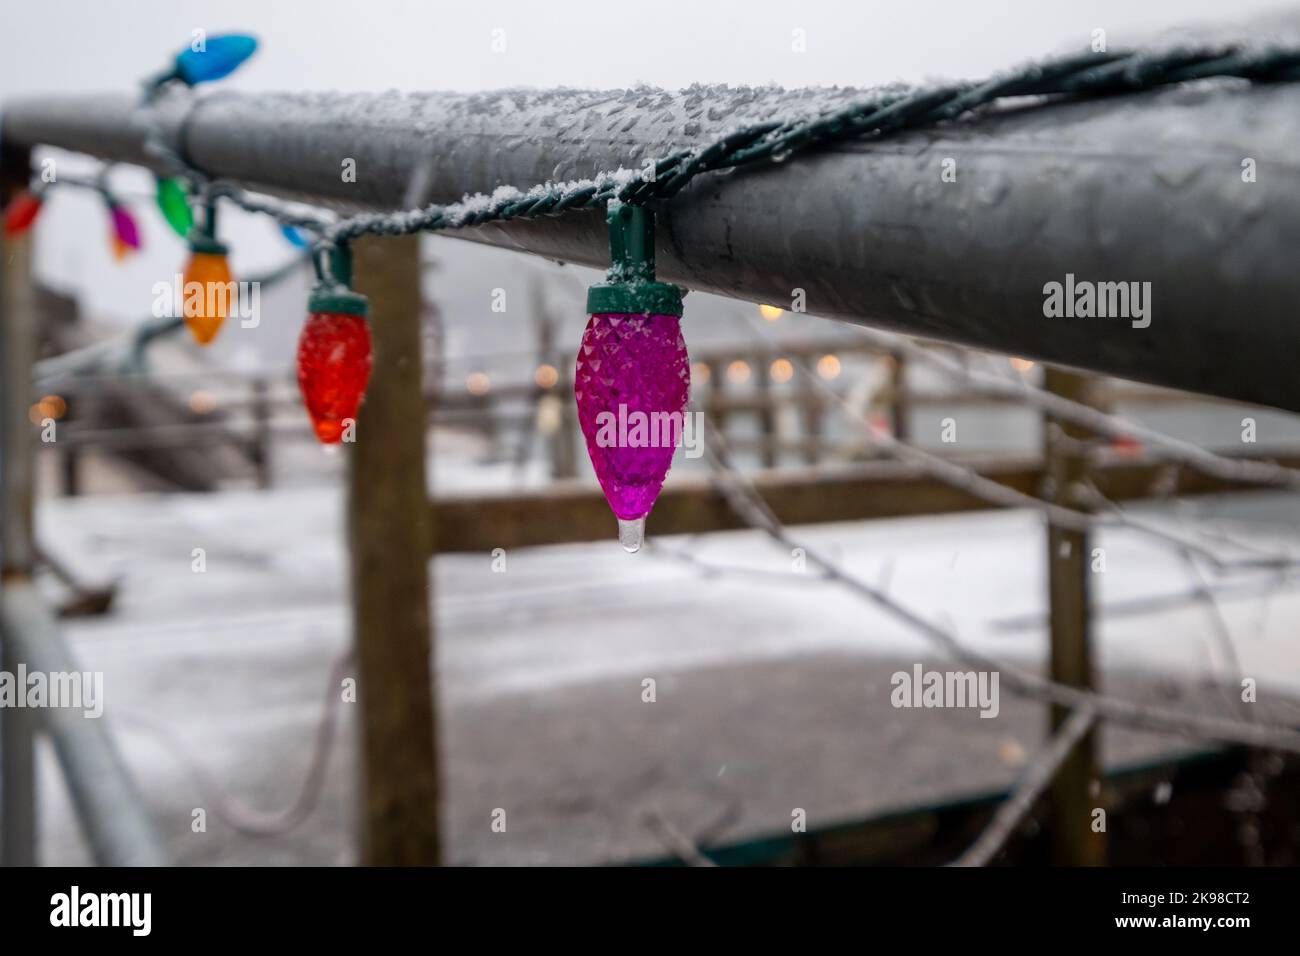 A string of colorful Christmas lights strung around a black metal handrail. There's fresh white snow on the rail and concrete ground. Stock Photo